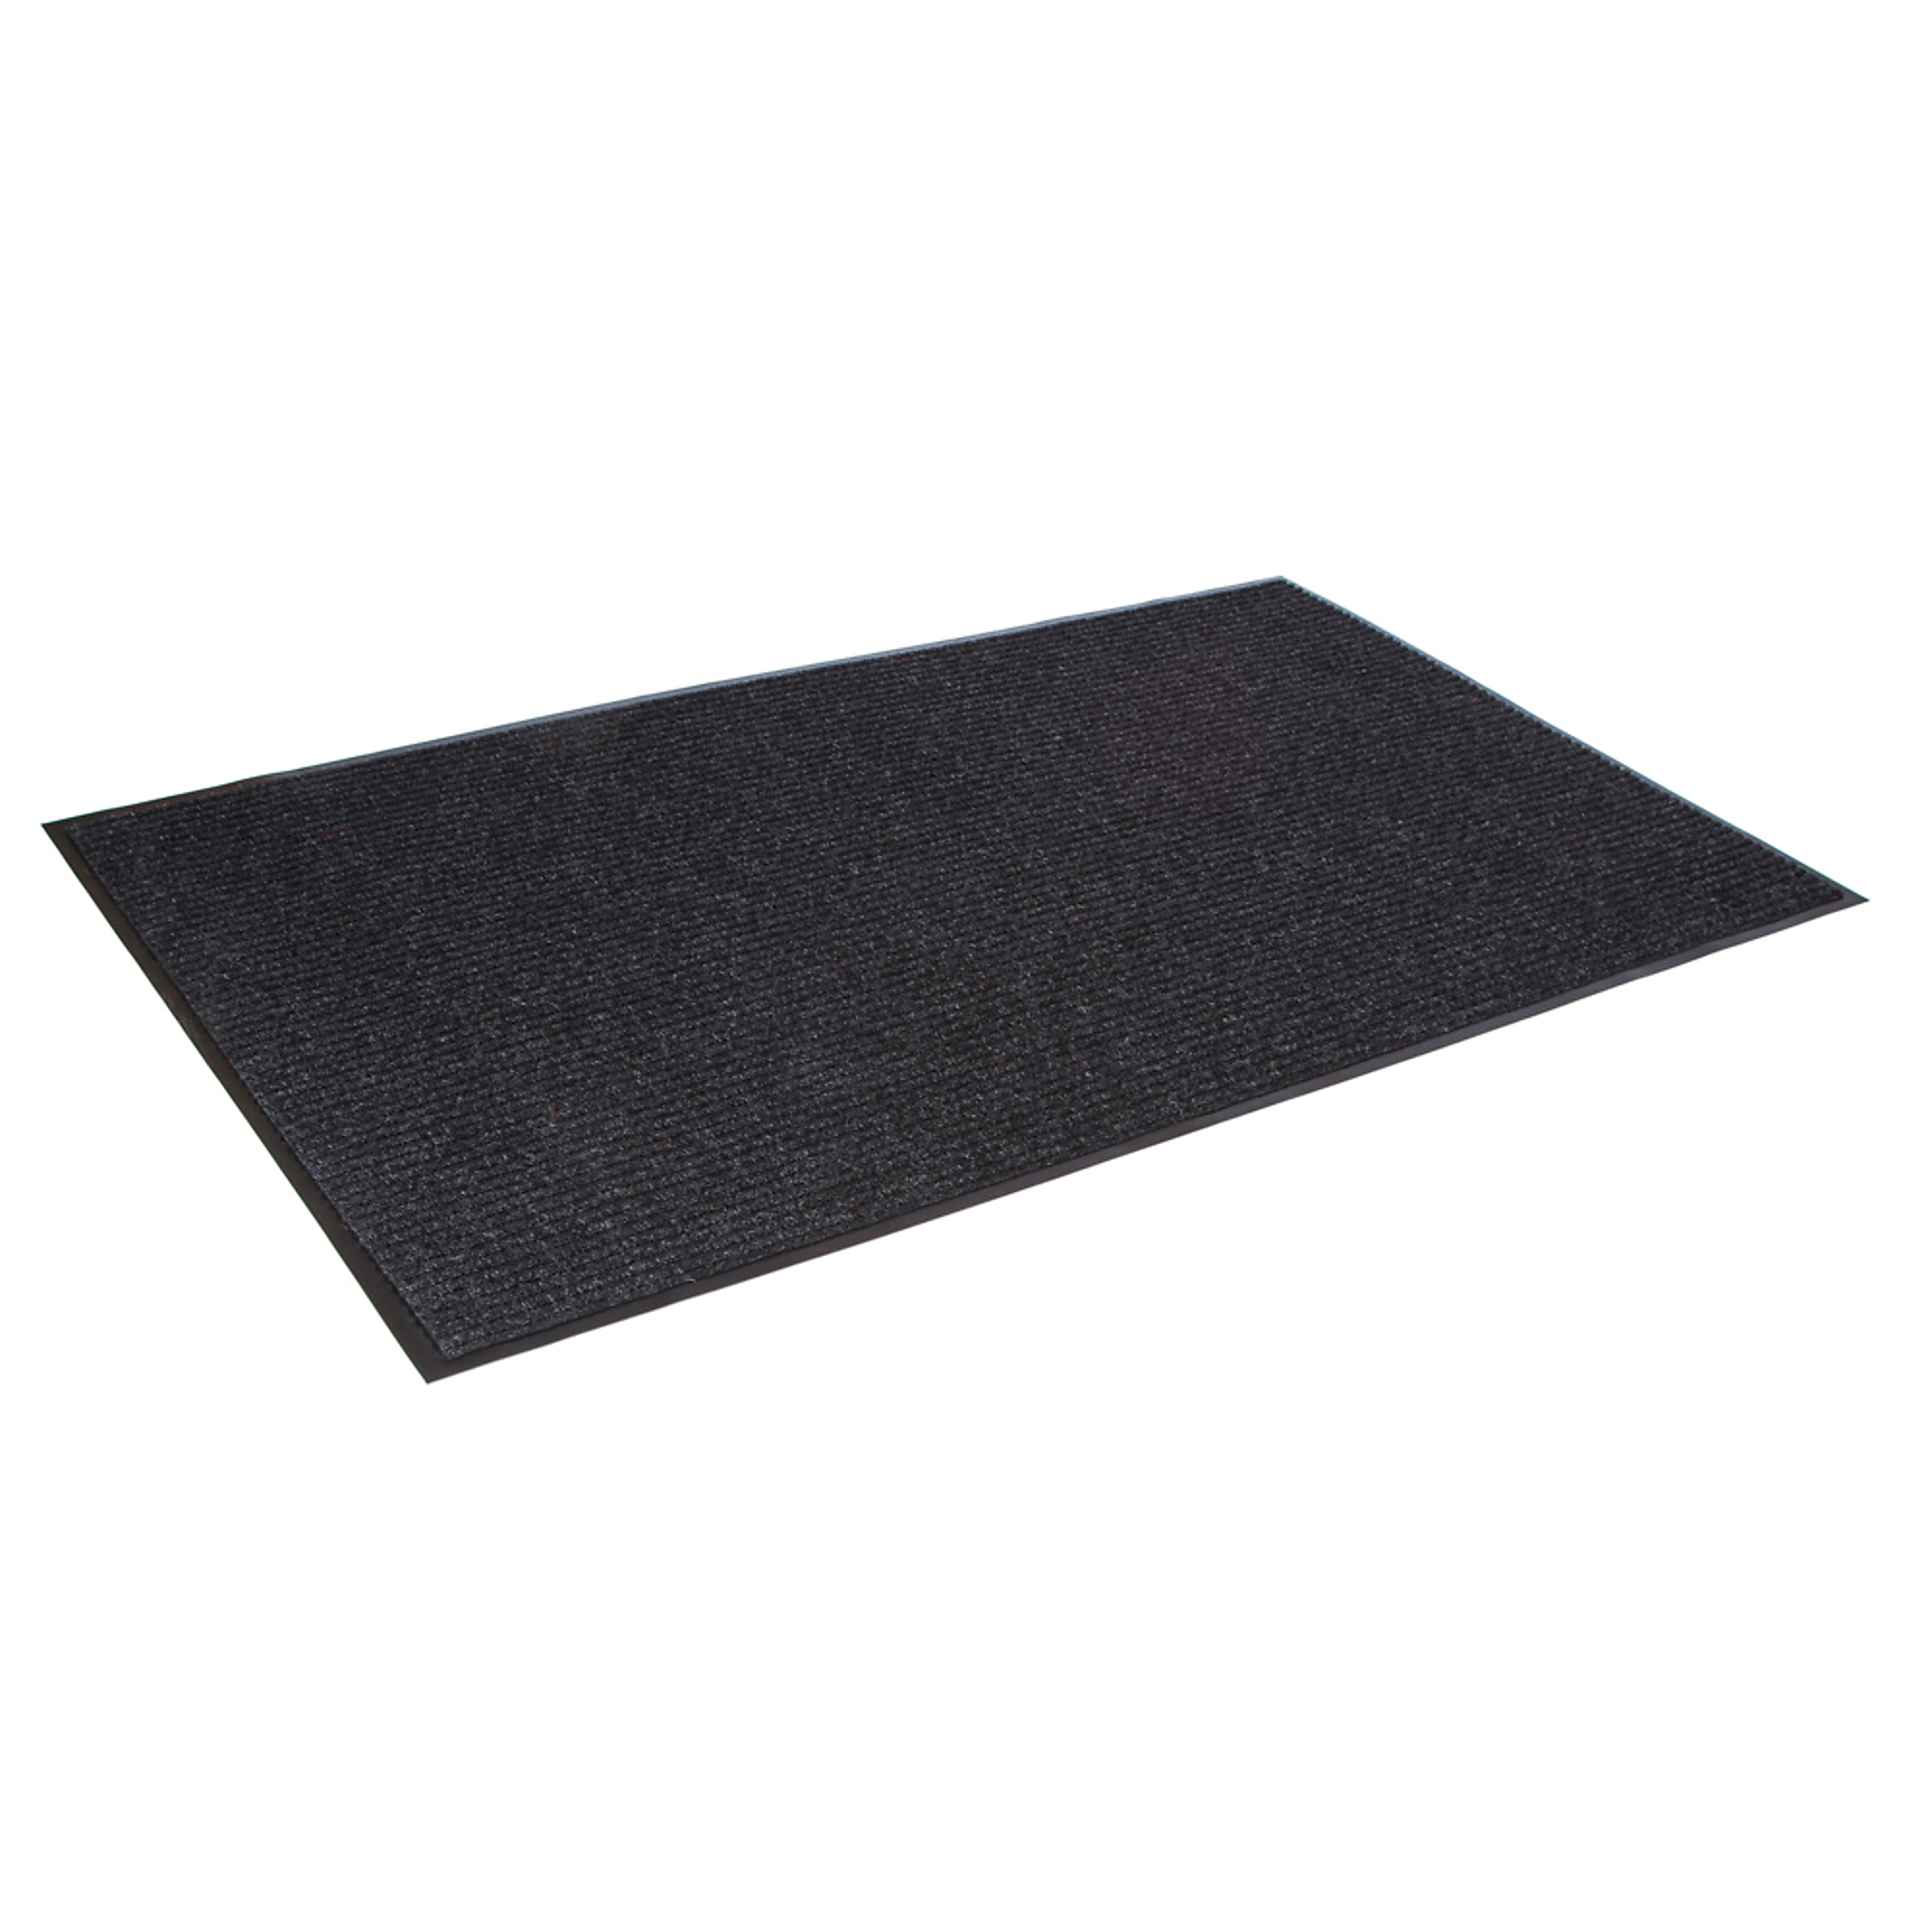 Crown Matting Technologies, Needle-Rib 3ft.x4ft. Charcoal, Width 36 in, Length 48 in, Thickness 5/16 in, Model NR 0034CH